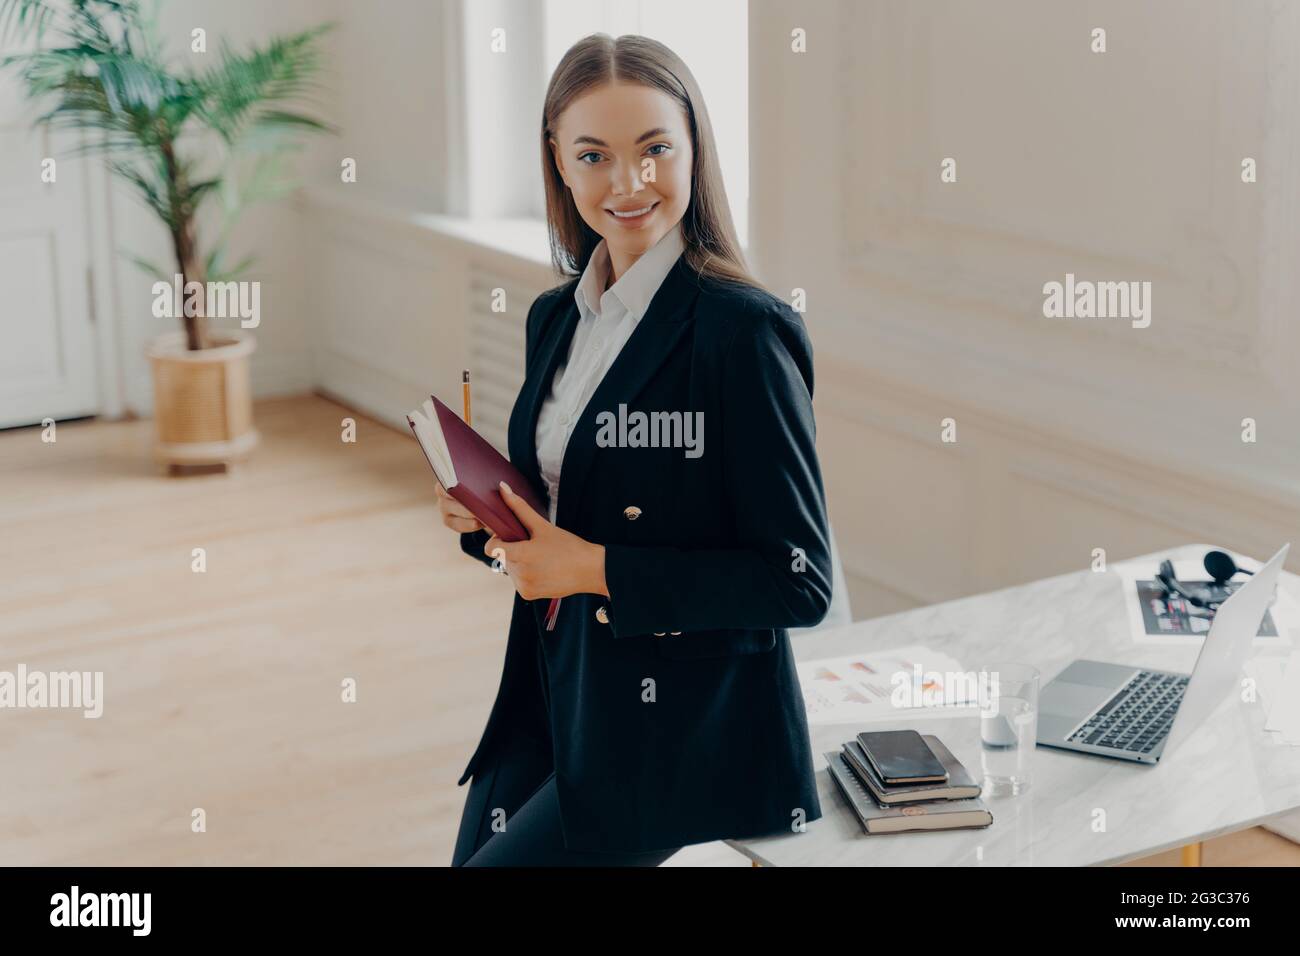 Professional business woman smiling at camera with notebook in hands Stock Photo